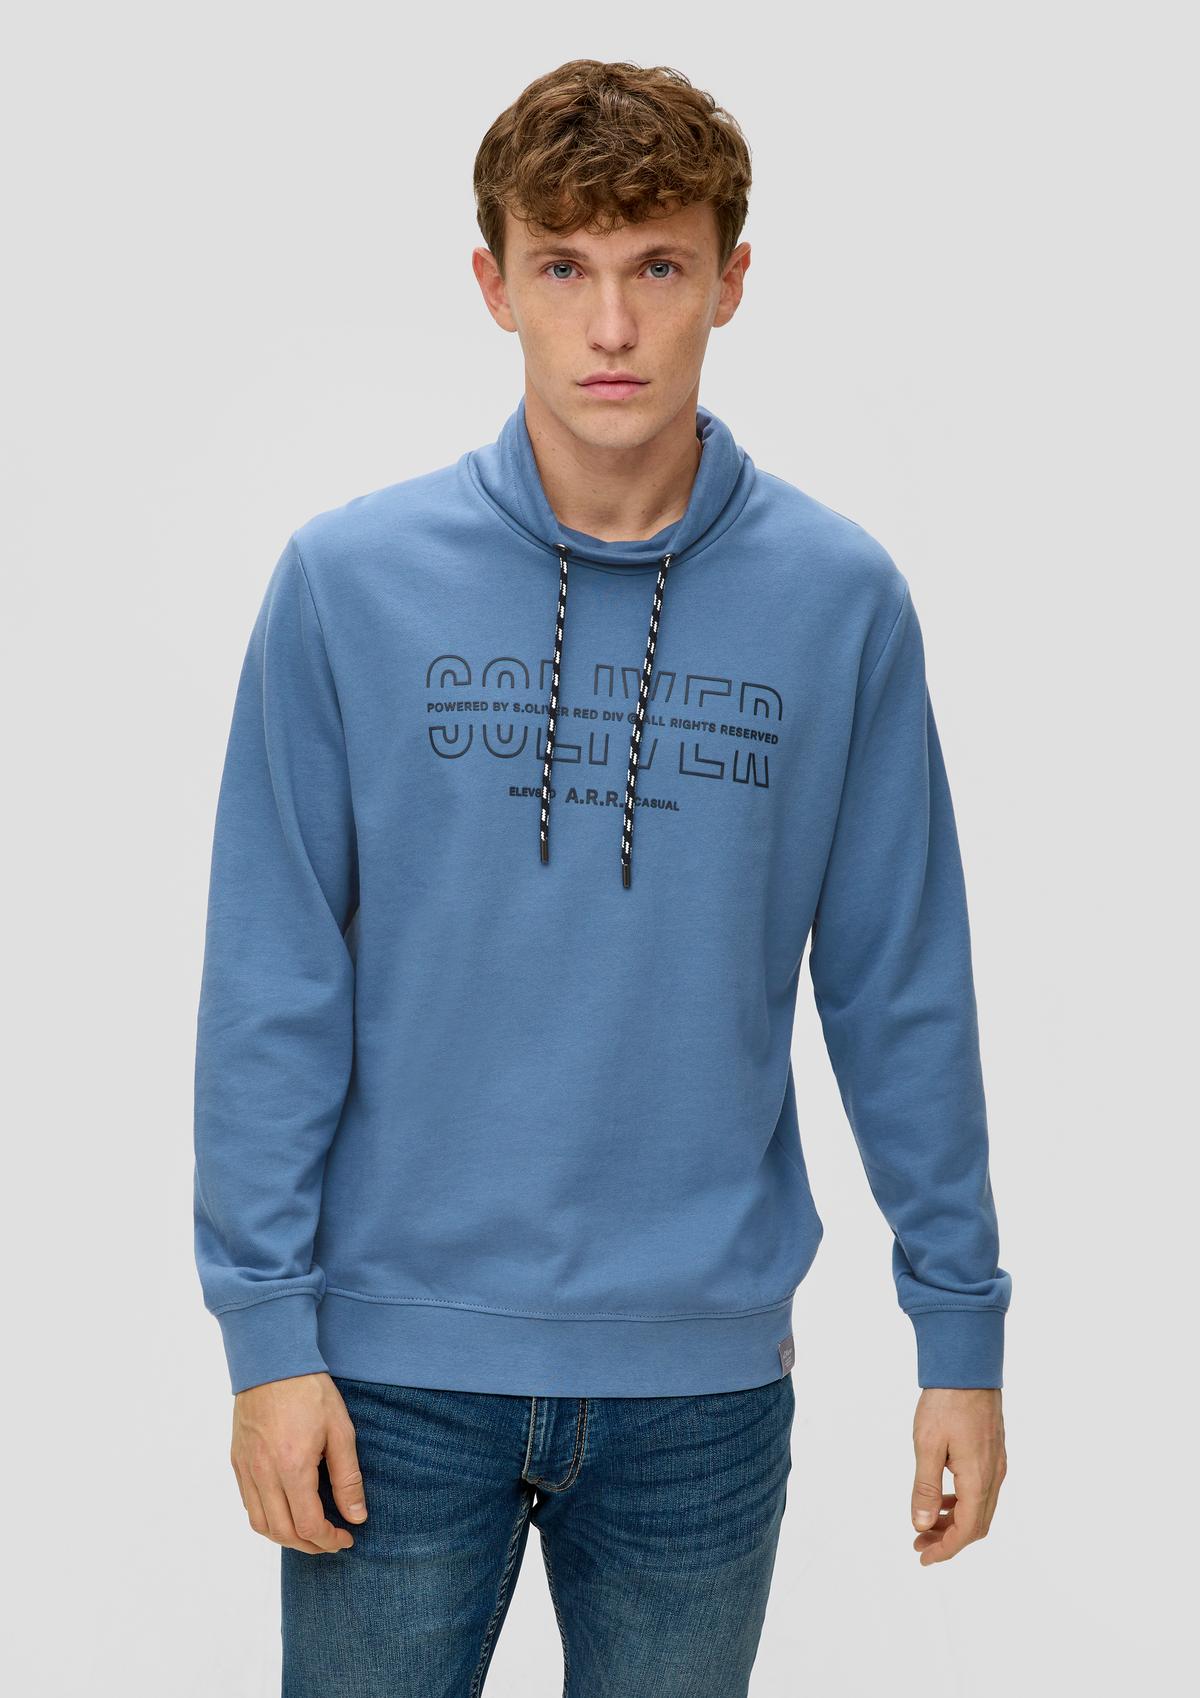 Sweatshirt with a front - navy print